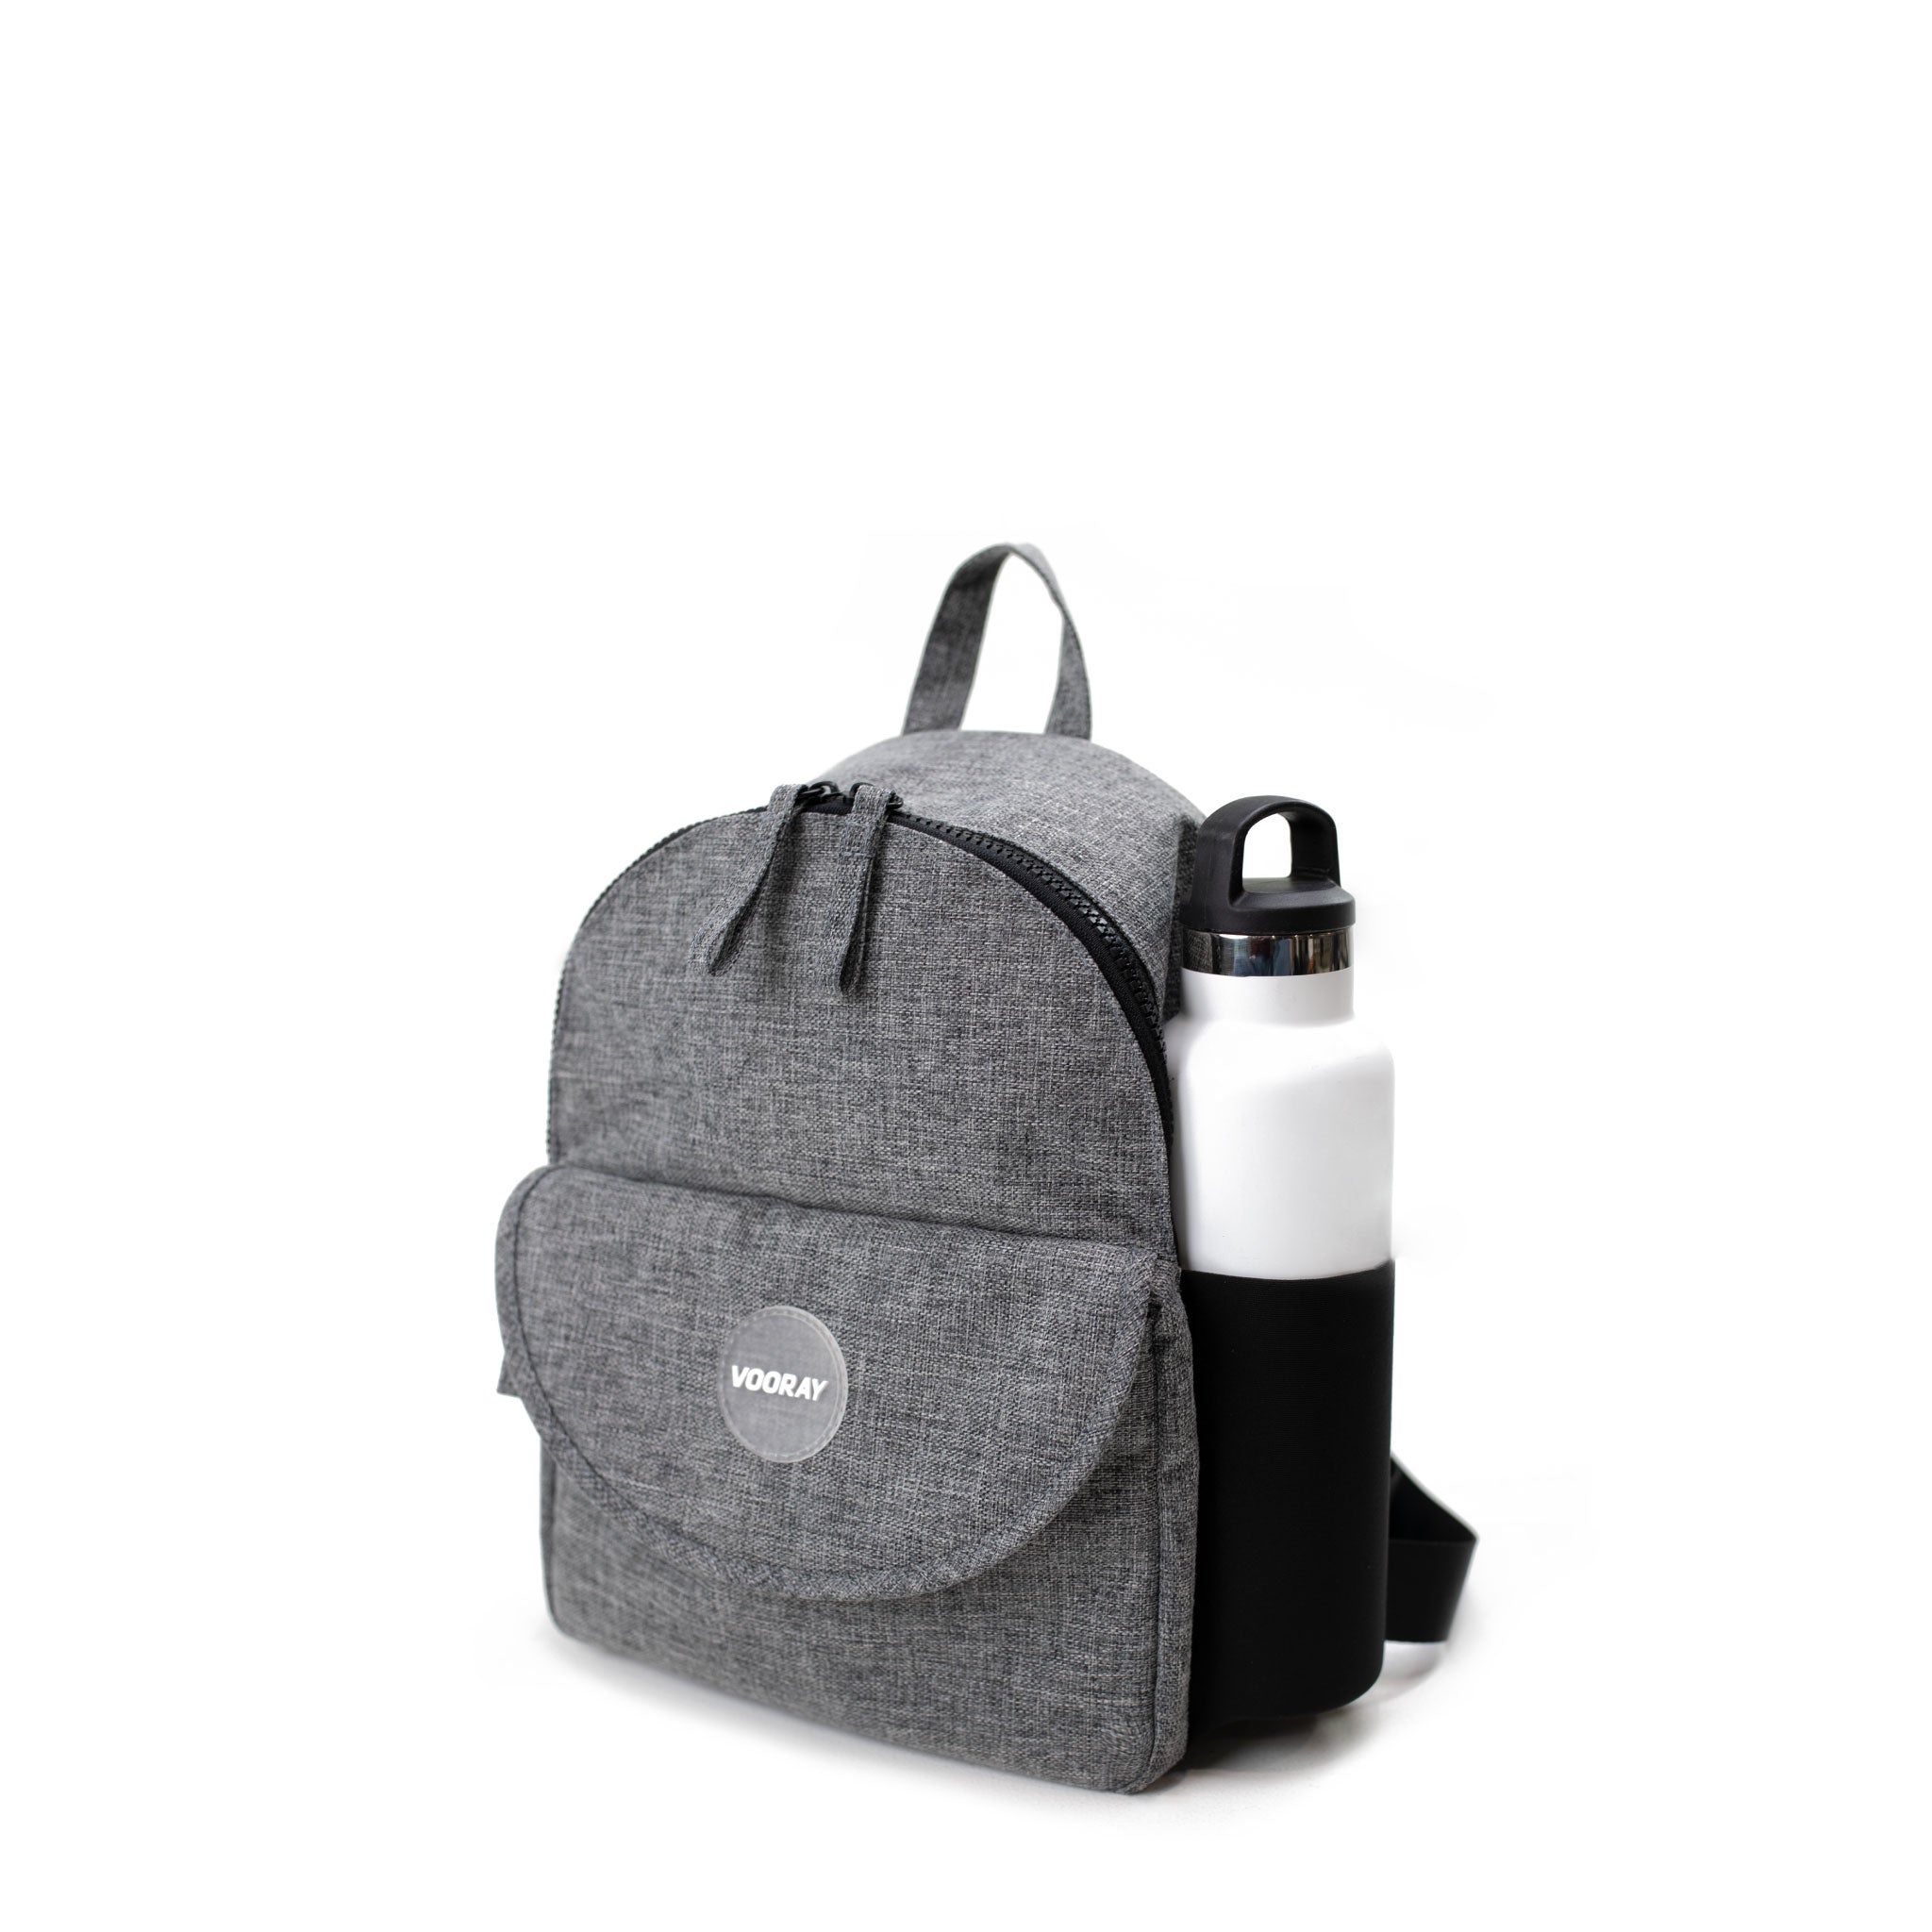 Vooray Lexi Small Backpack